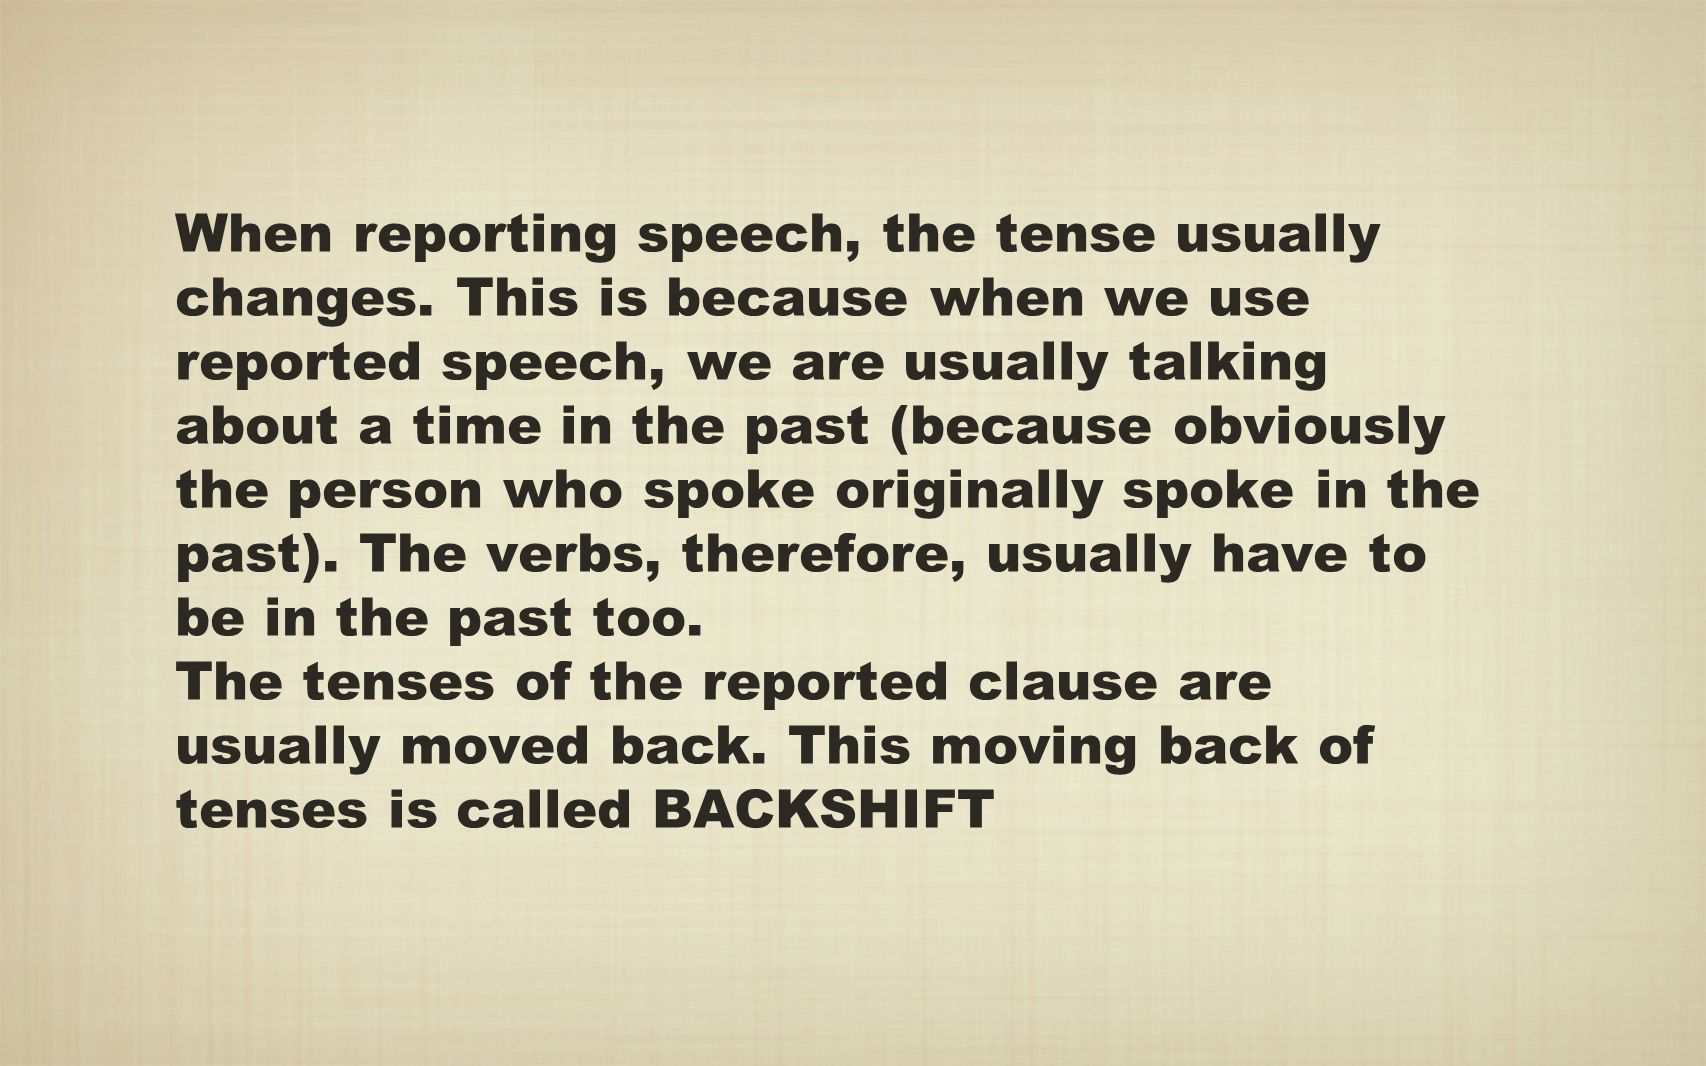 When reporting speech, the tense usually changes